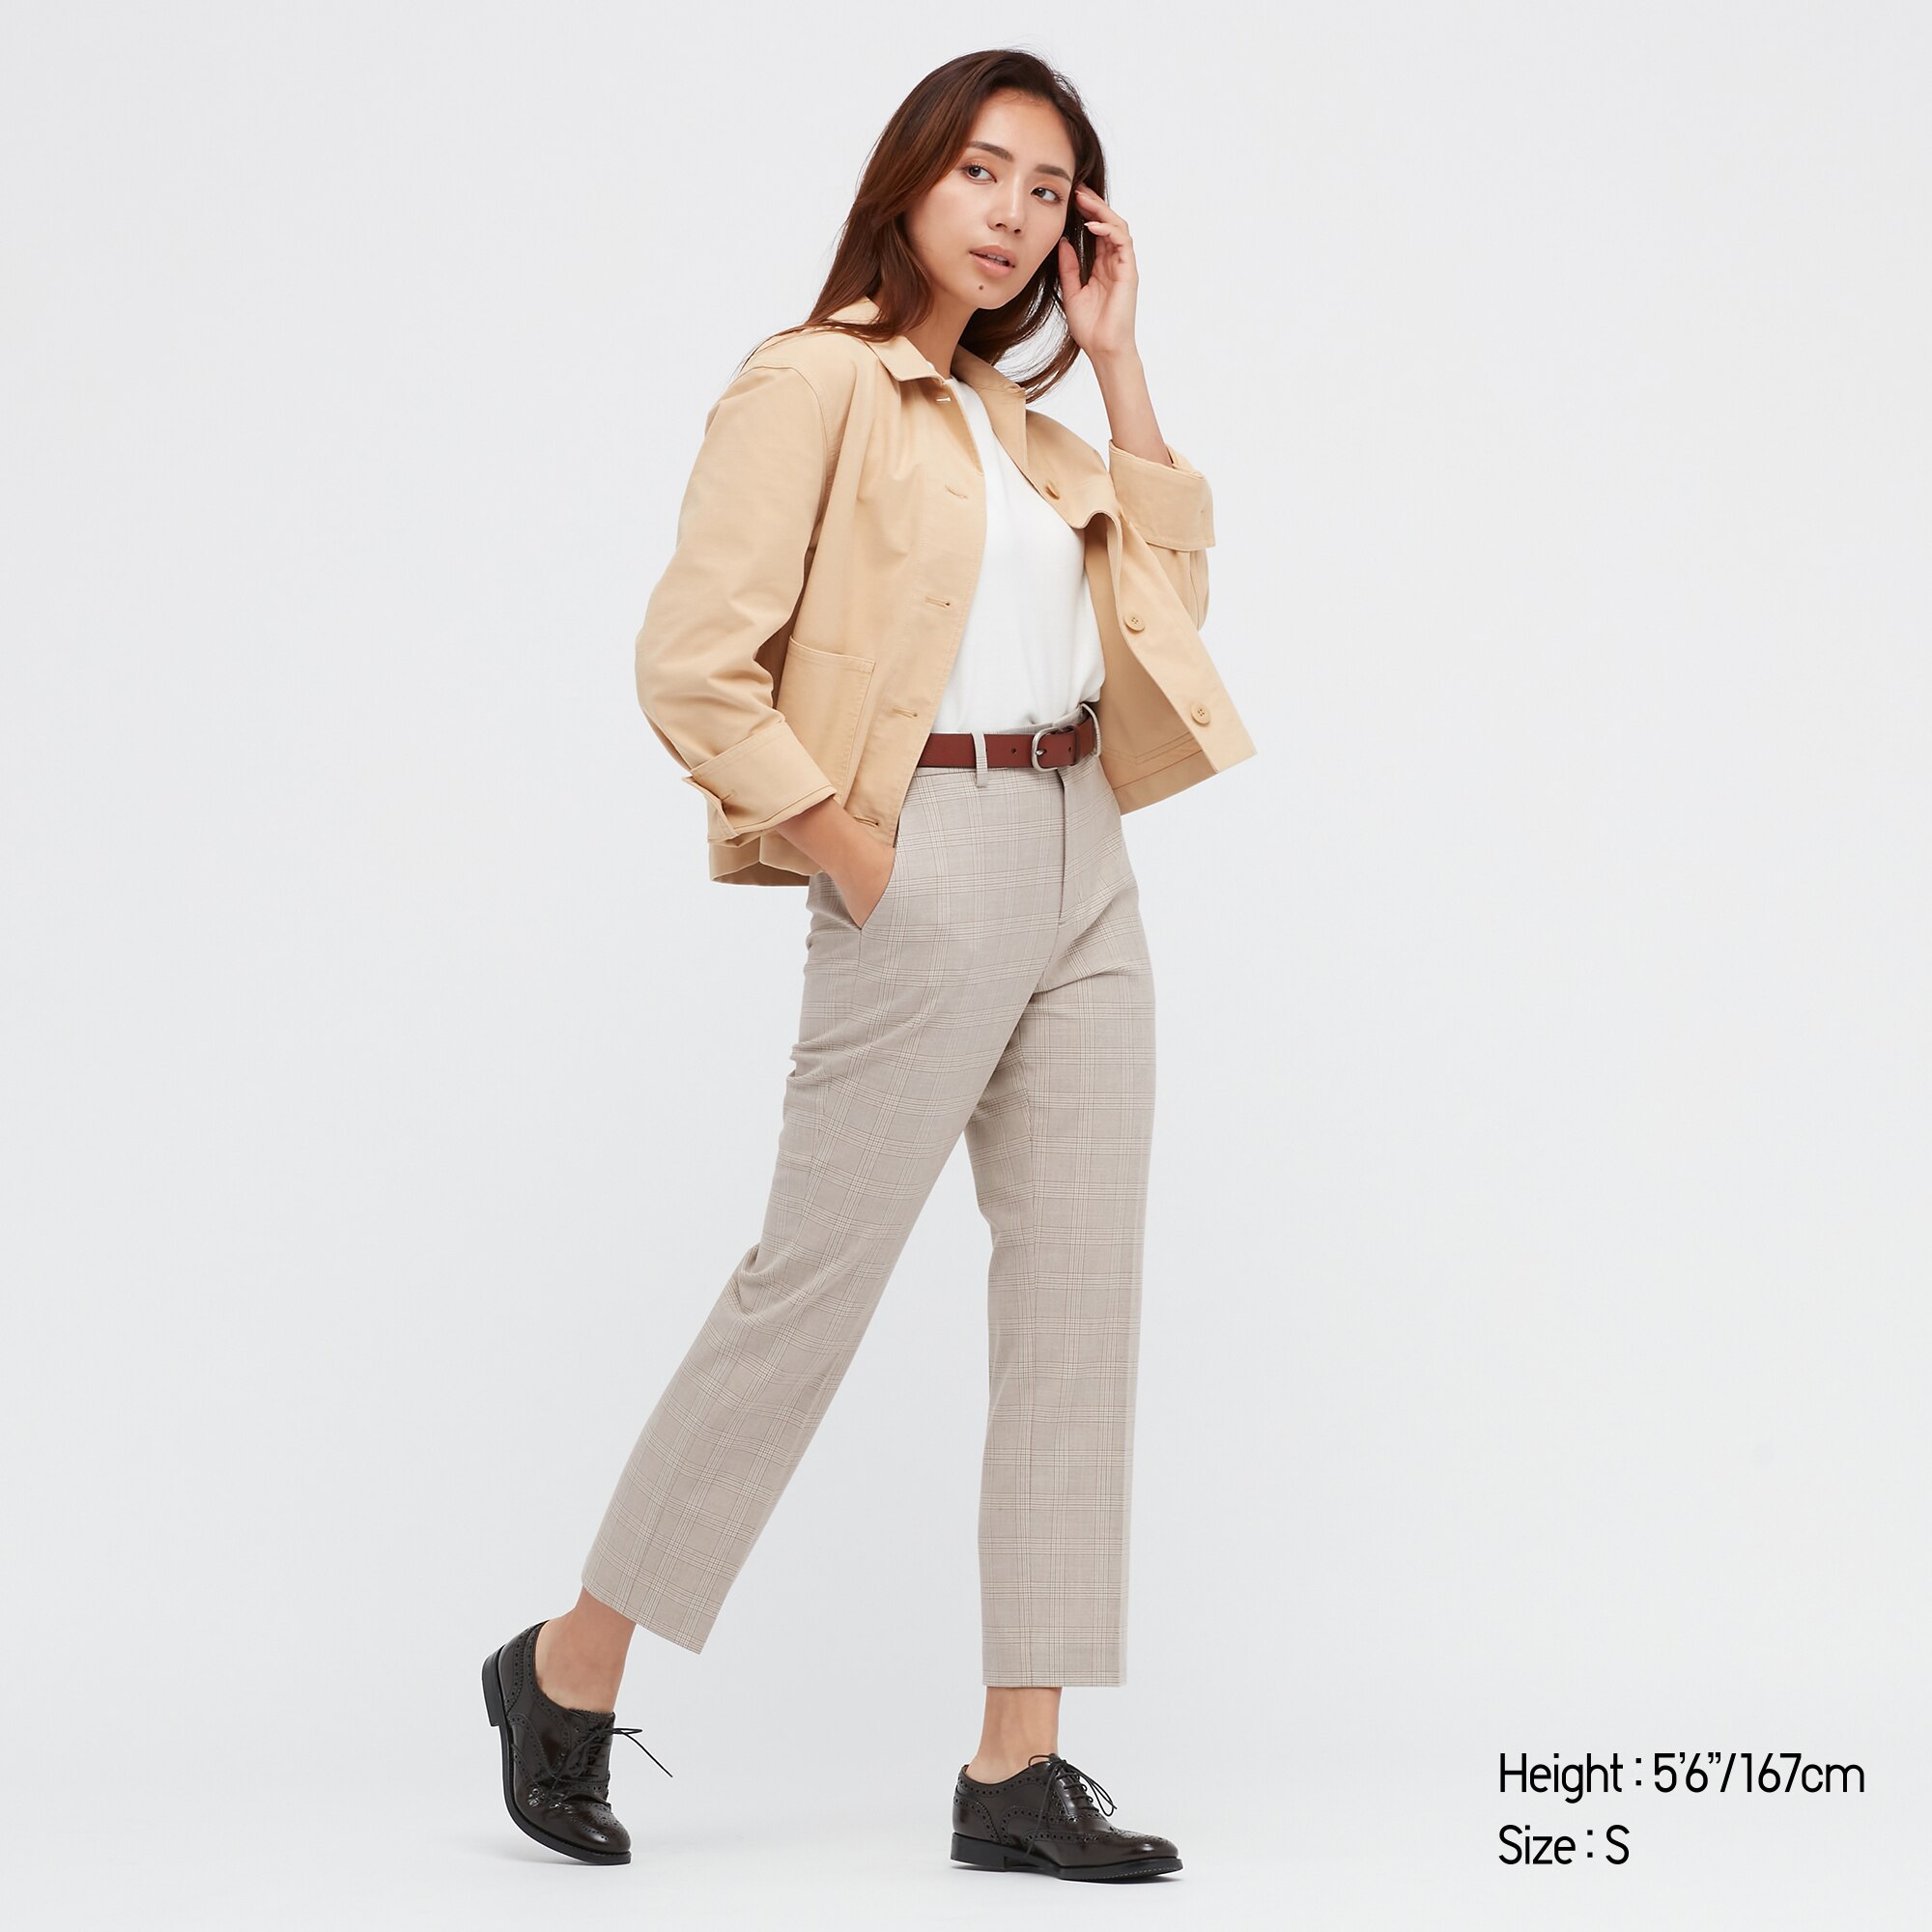 Uniqlo Philippines  UNIQLO 1111 Special Offer  Smart Ankle Pants  Brushed  EZY Ankle Pants suniqlocom3oahtqE Shop our 1111 deals  Enjoy soft brushed cotton featuring 2WAY Stretch for sleek outfits or